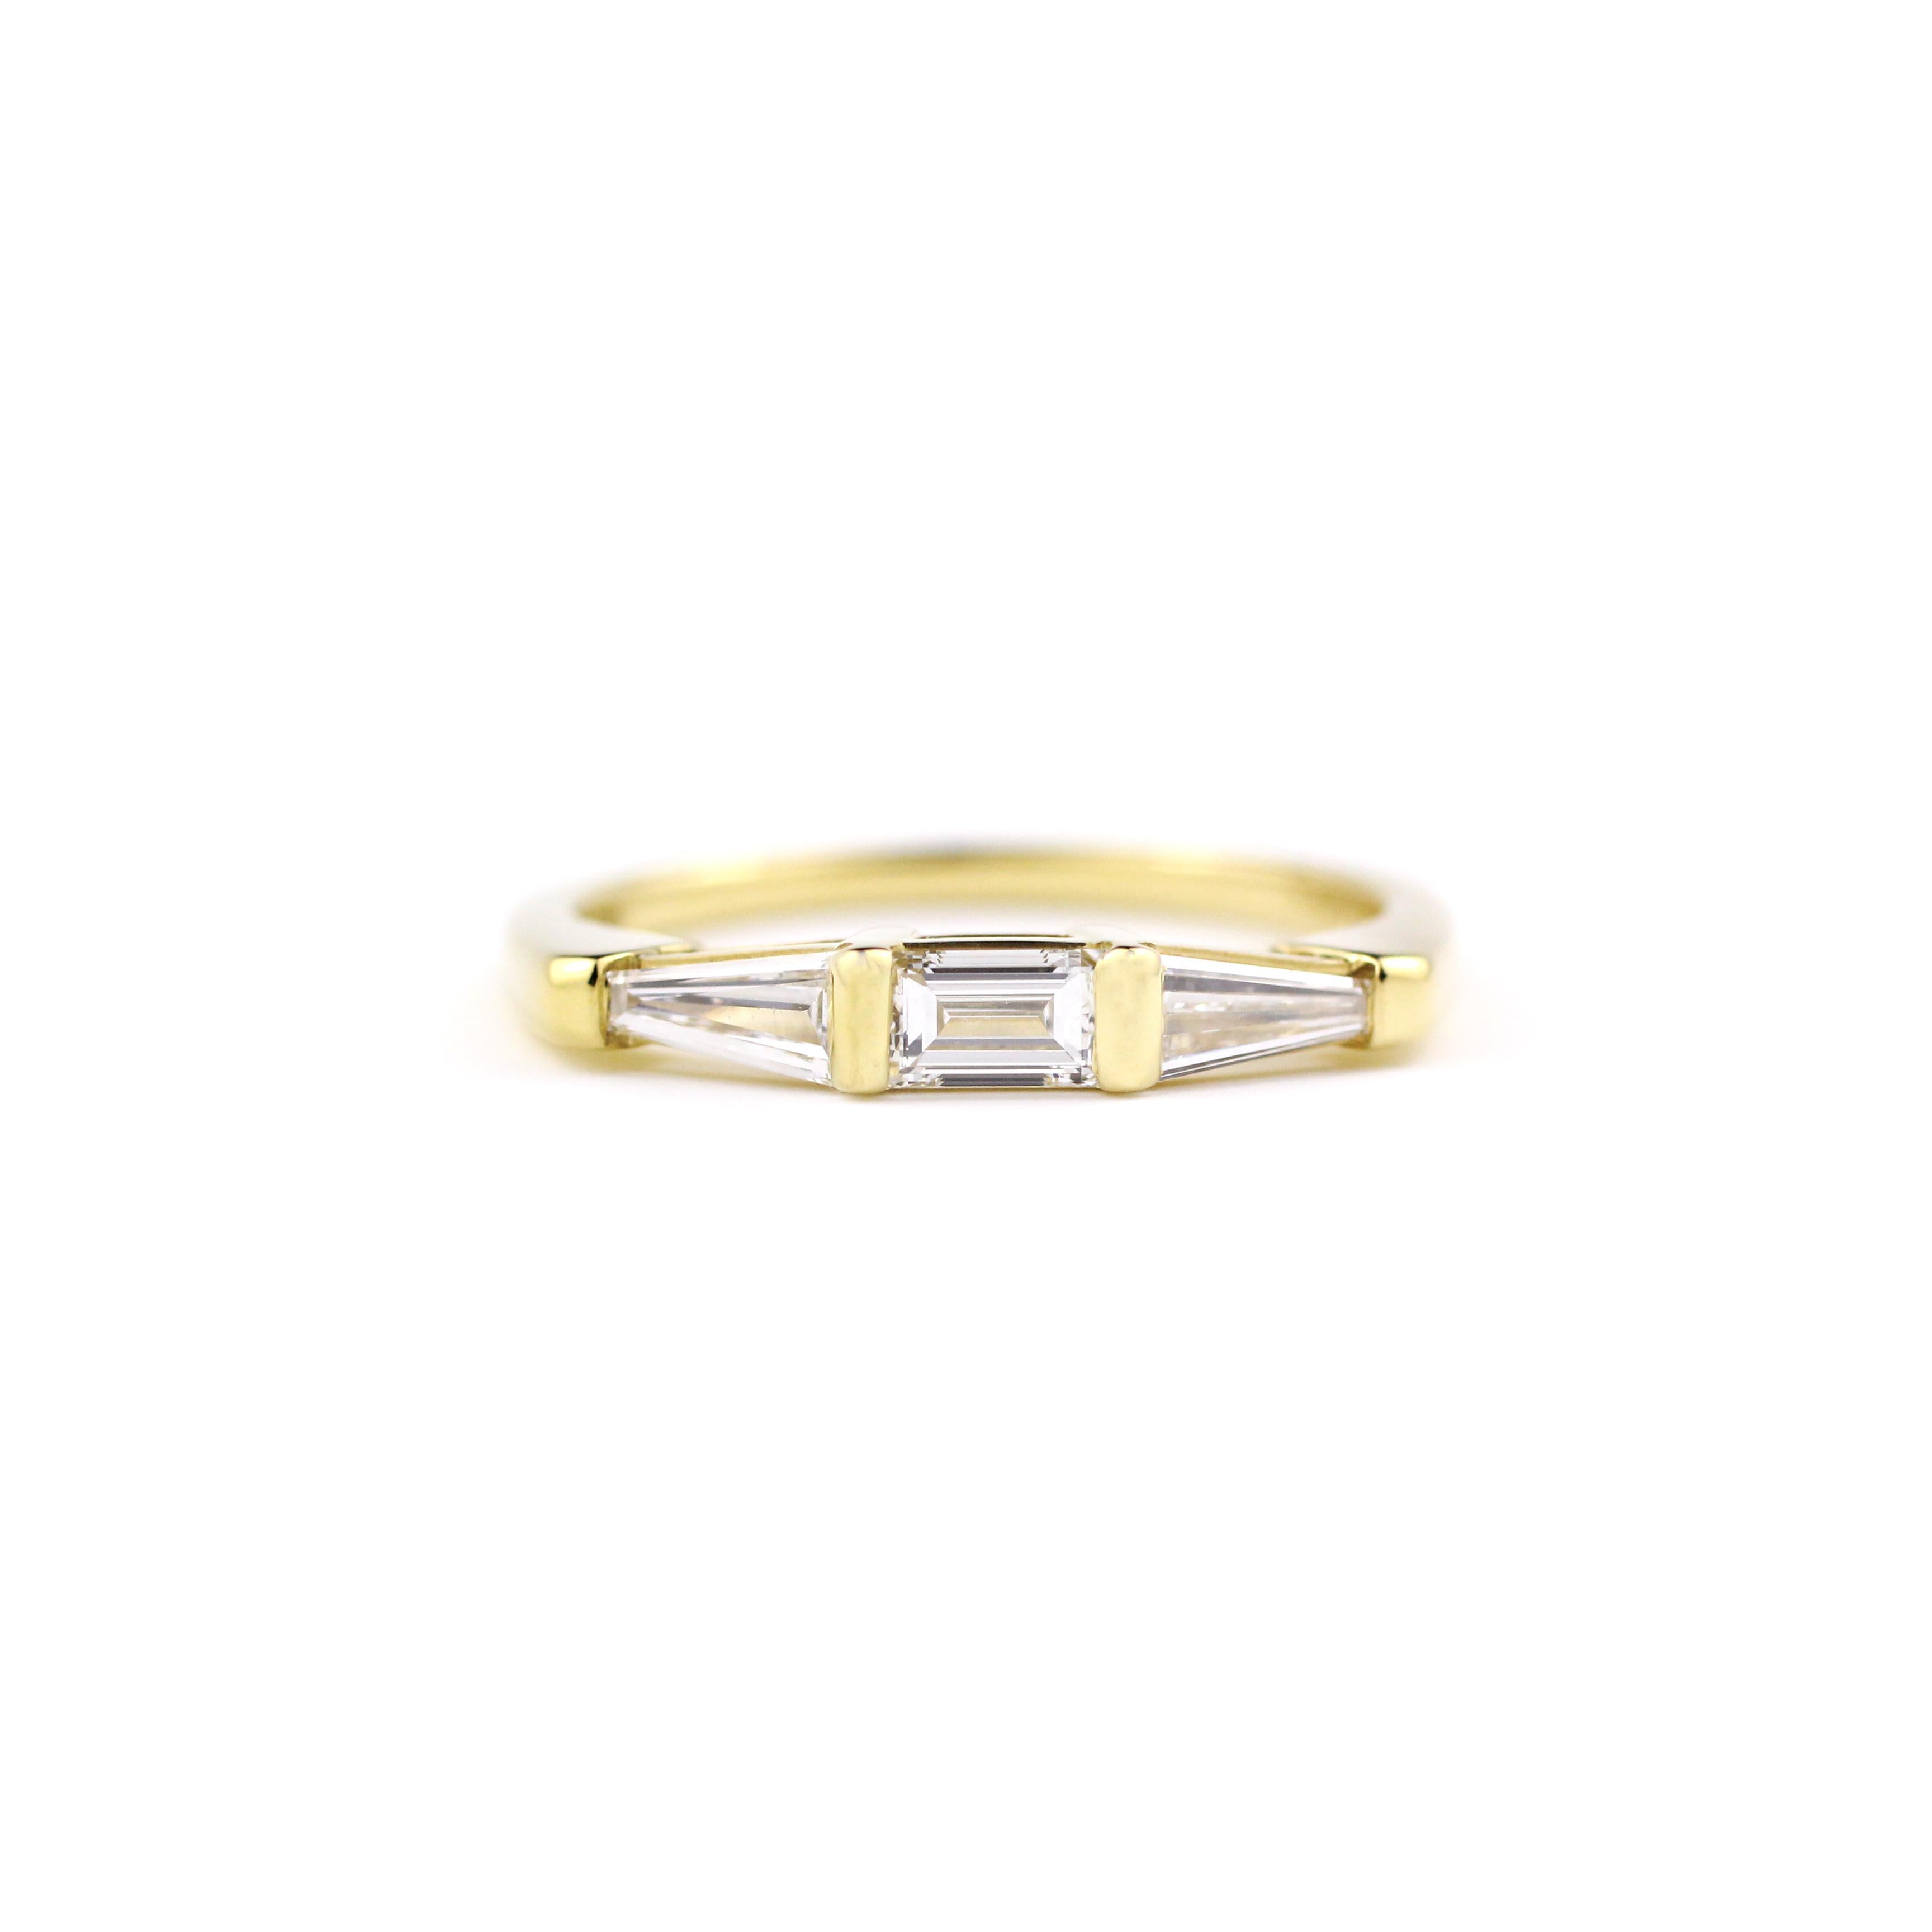 This modern and elegant 18 Kt Gold Ring contains one Baguette Diamond (.23 Cts.) flanked by two Tapered Baguette Diamonds (.28 Cts).

In-stock Size 6 1/2 for immediate delivery.

This ring can be sized to fit.  Please allow 2 weeks for resizing. 